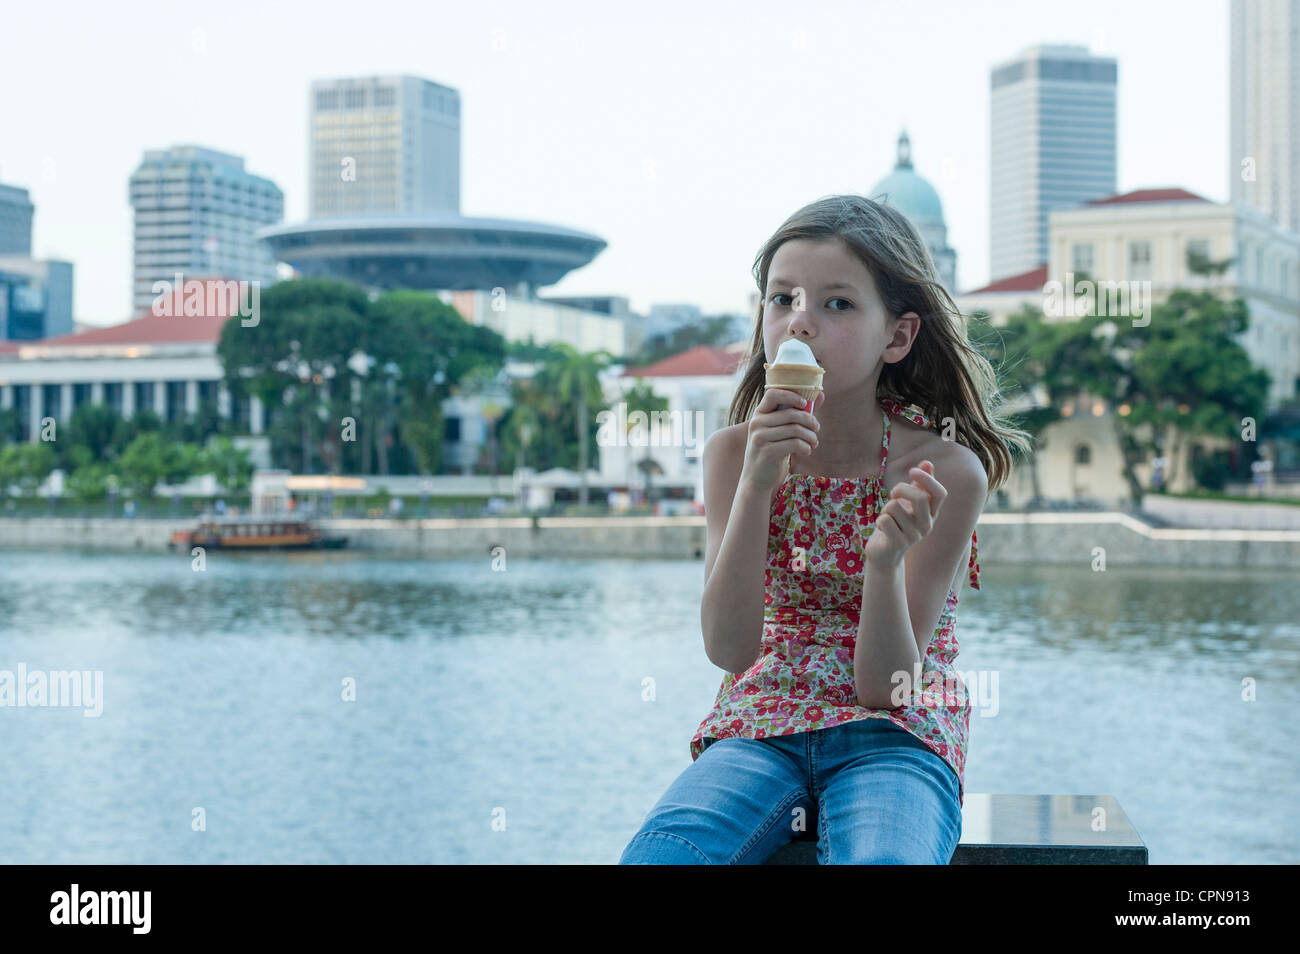 Girl eating ice cream cone by river Stock Photo